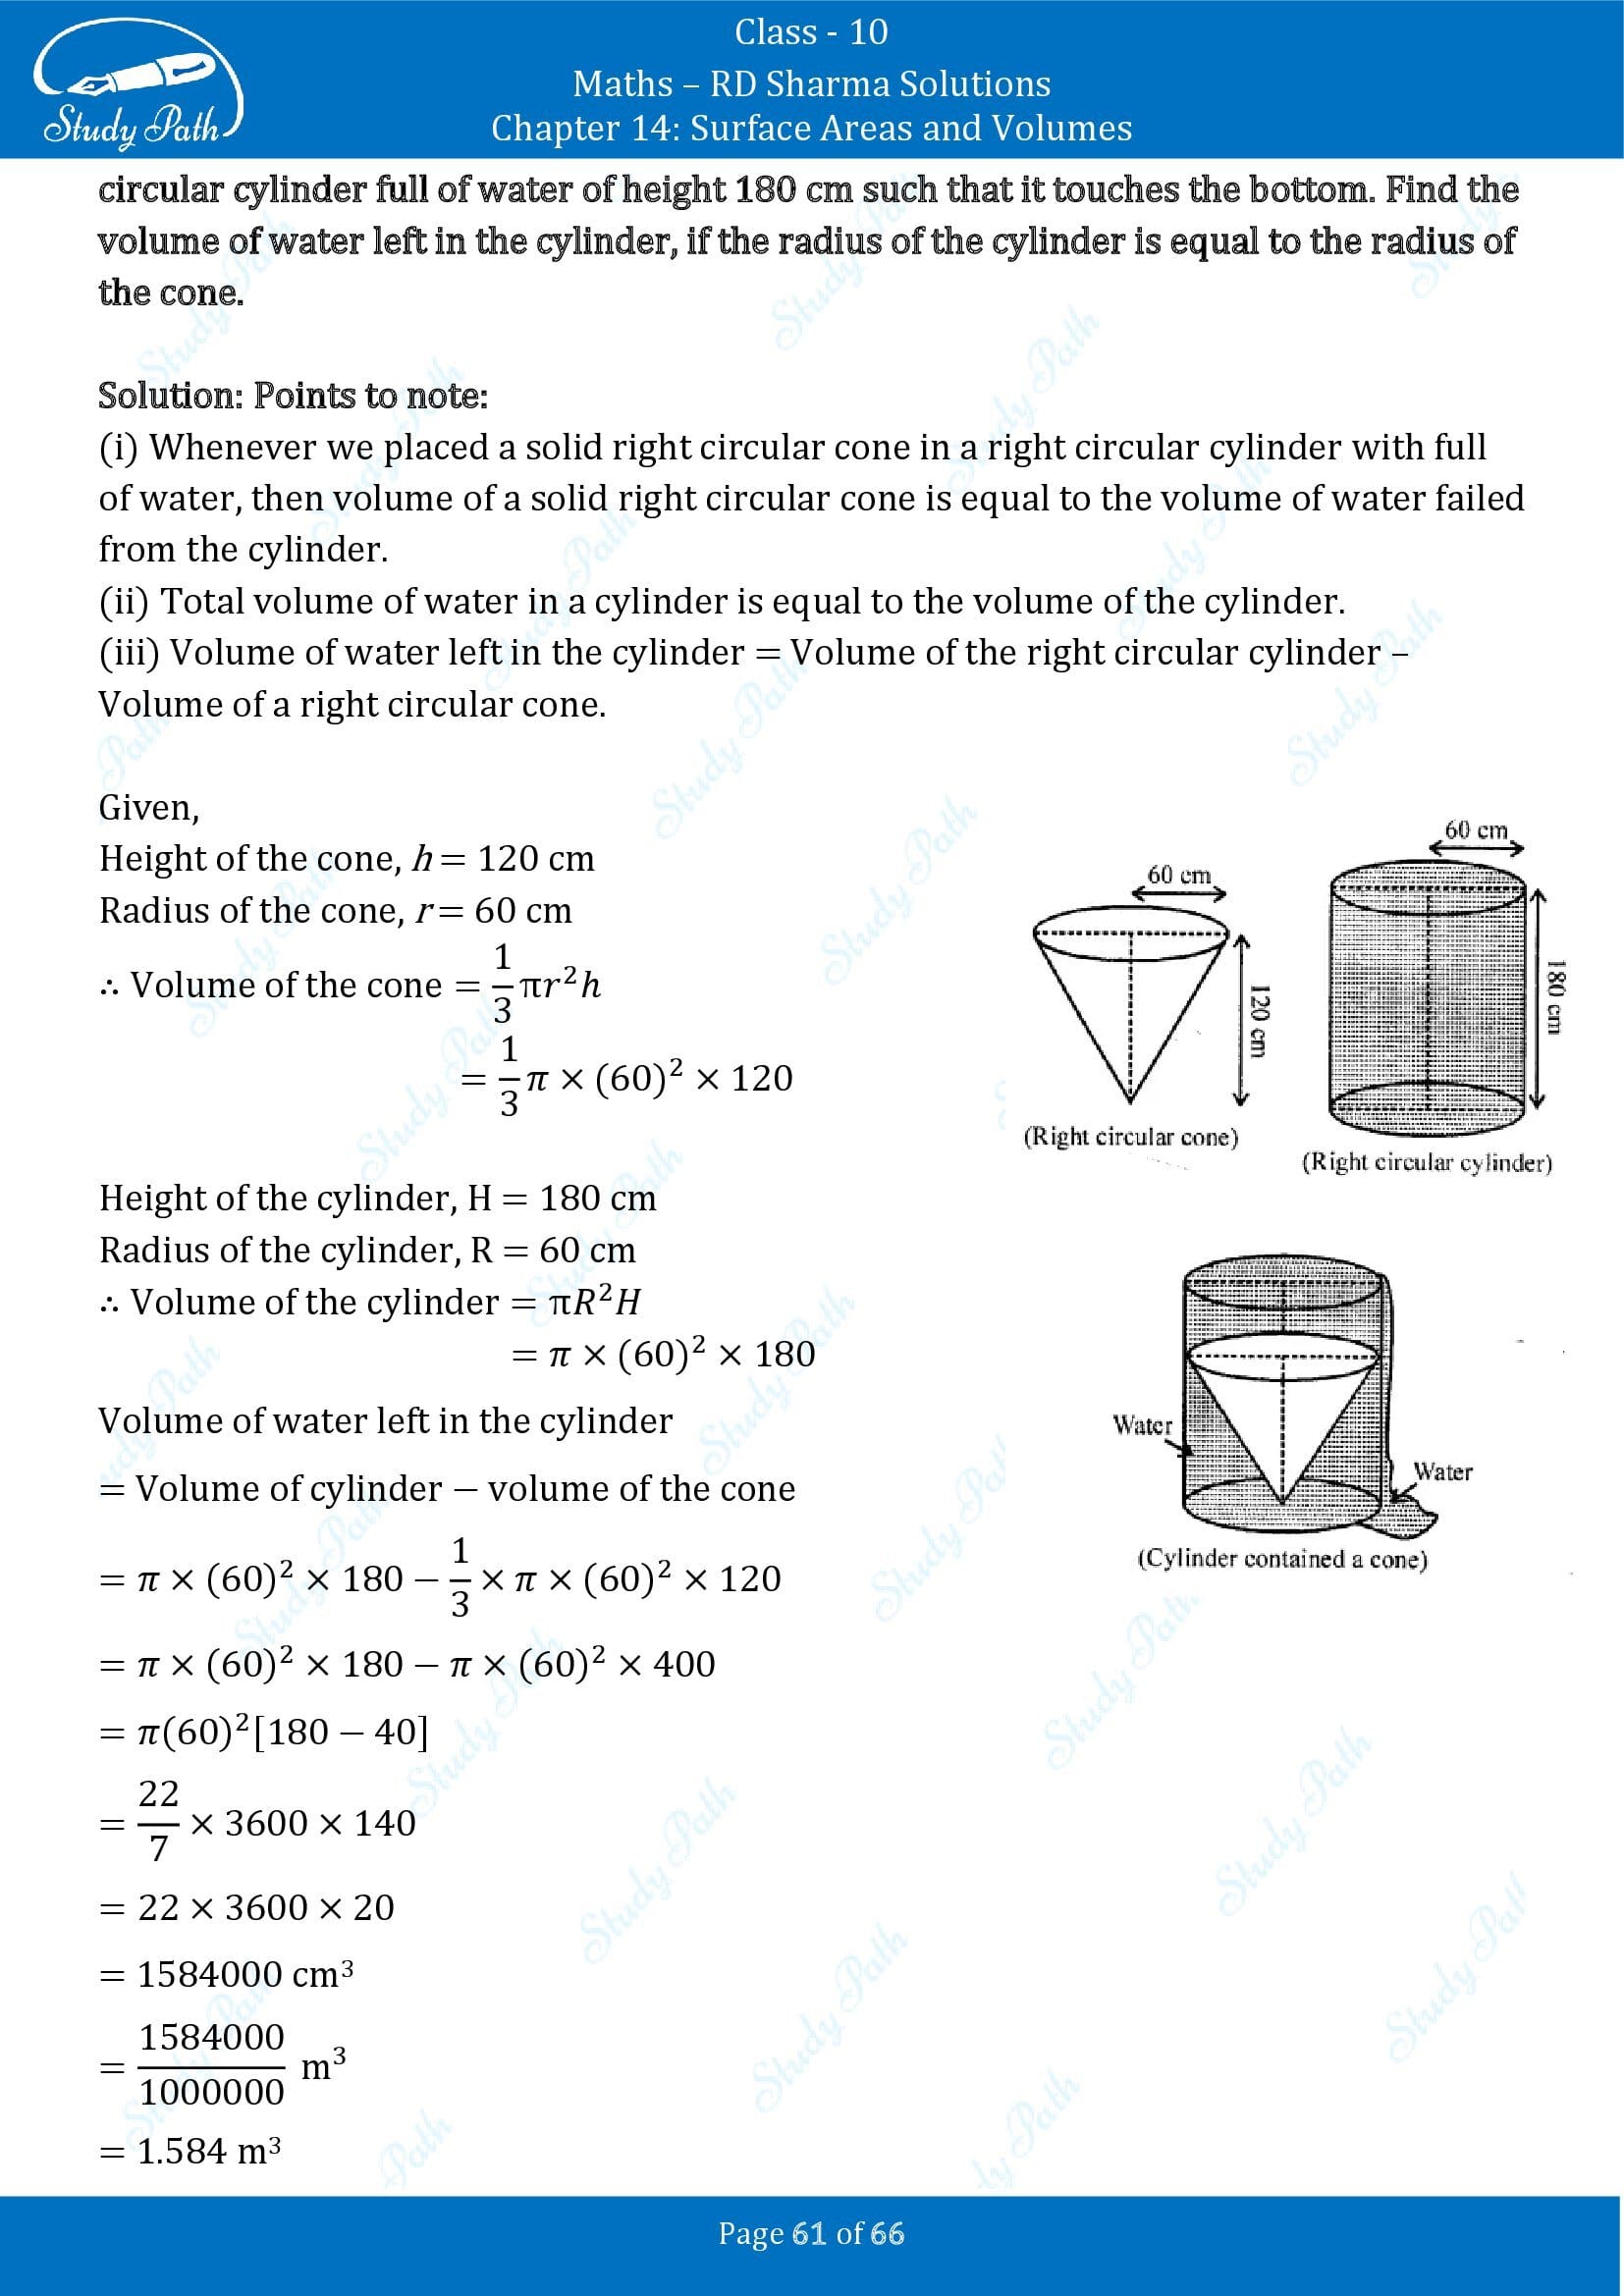 RD Sharma Solutions Class 10 Chapter 14 Surface Areas and Volumes Exercise 14.1 00061